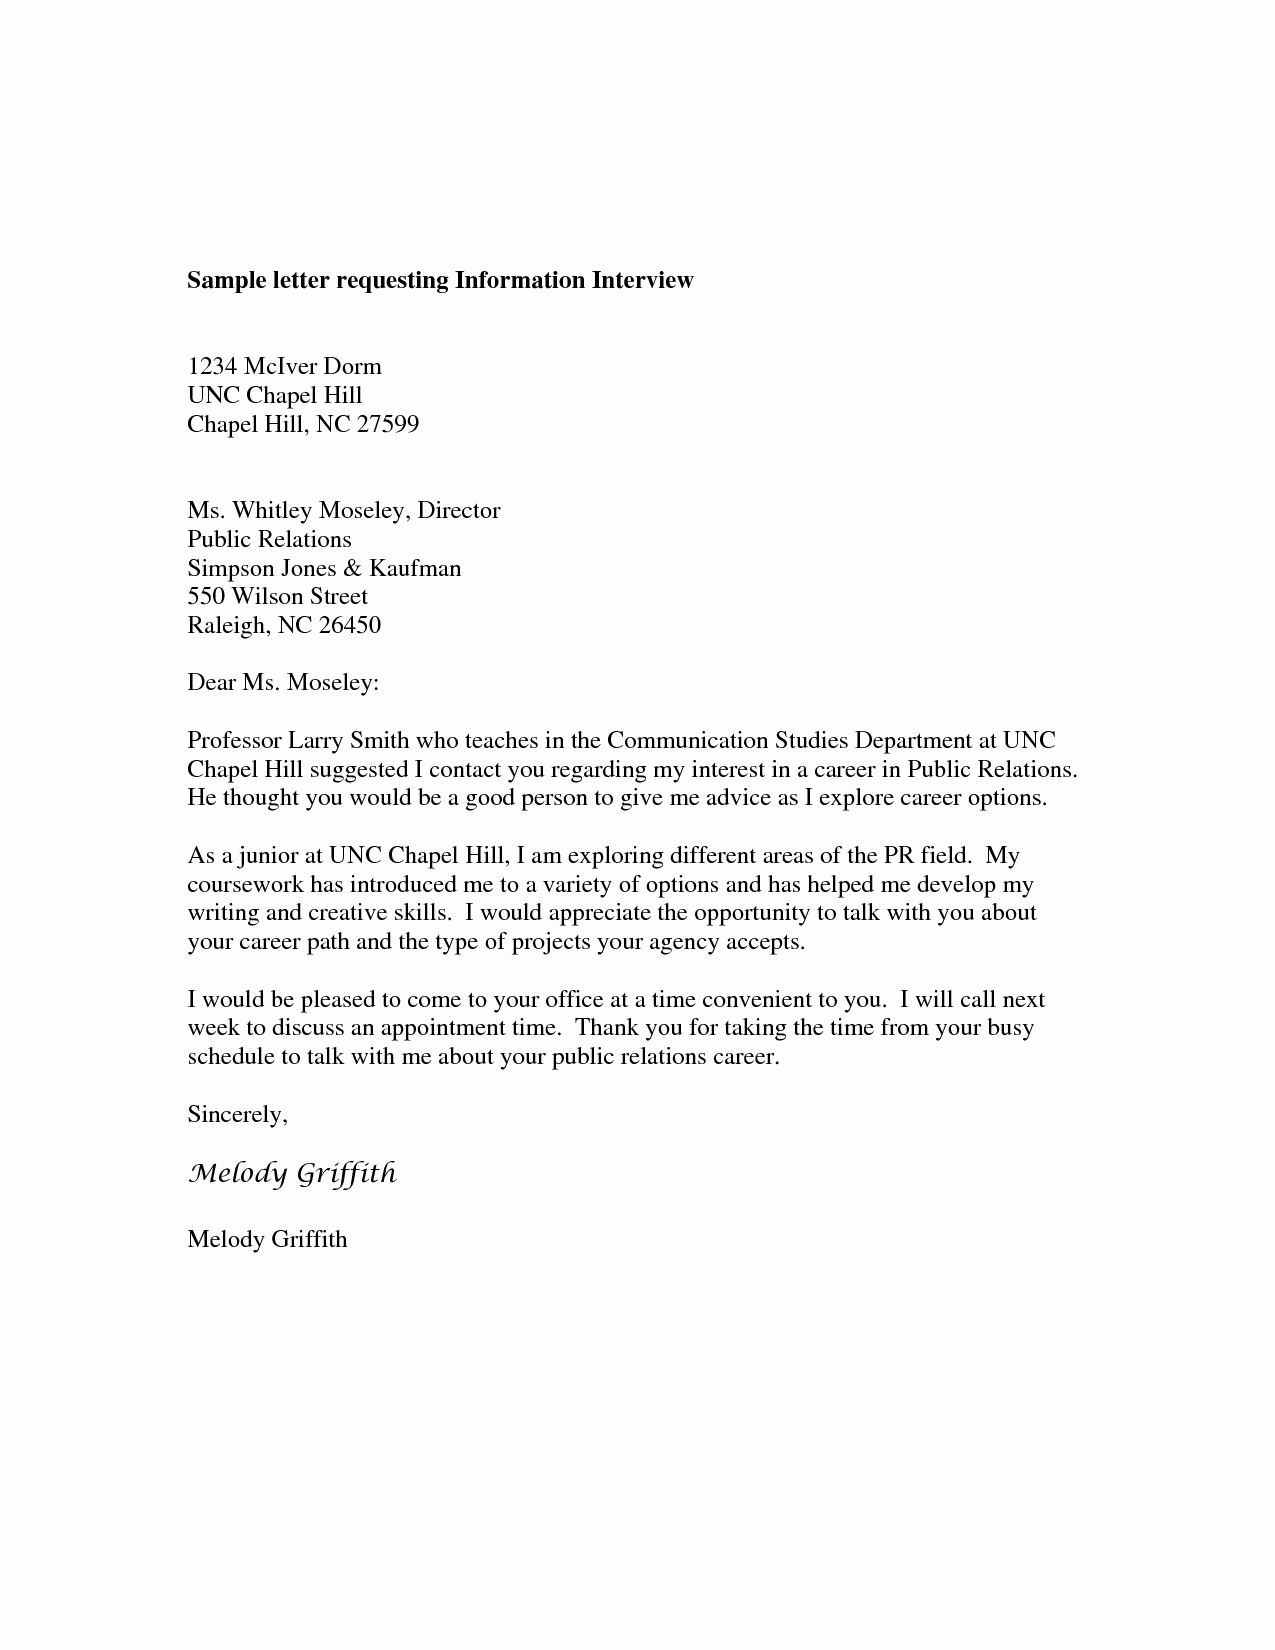 Free Business Letter Template Fresh Sample Letter Request for Information